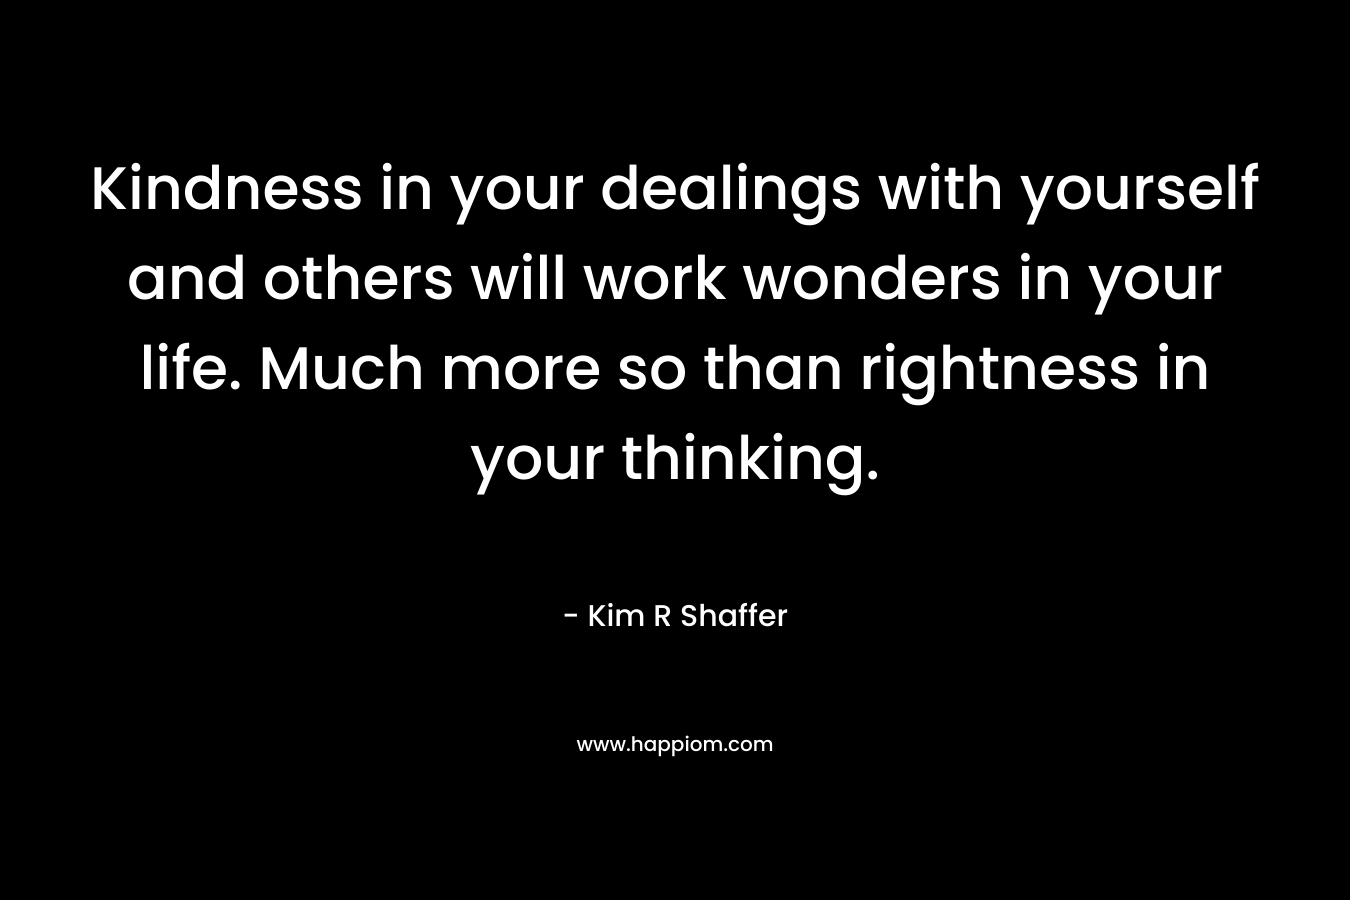 Kindness in your dealings with yourself and others will work wonders in your life. Much more so than rightness in your thinking. – Kim R Shaffer